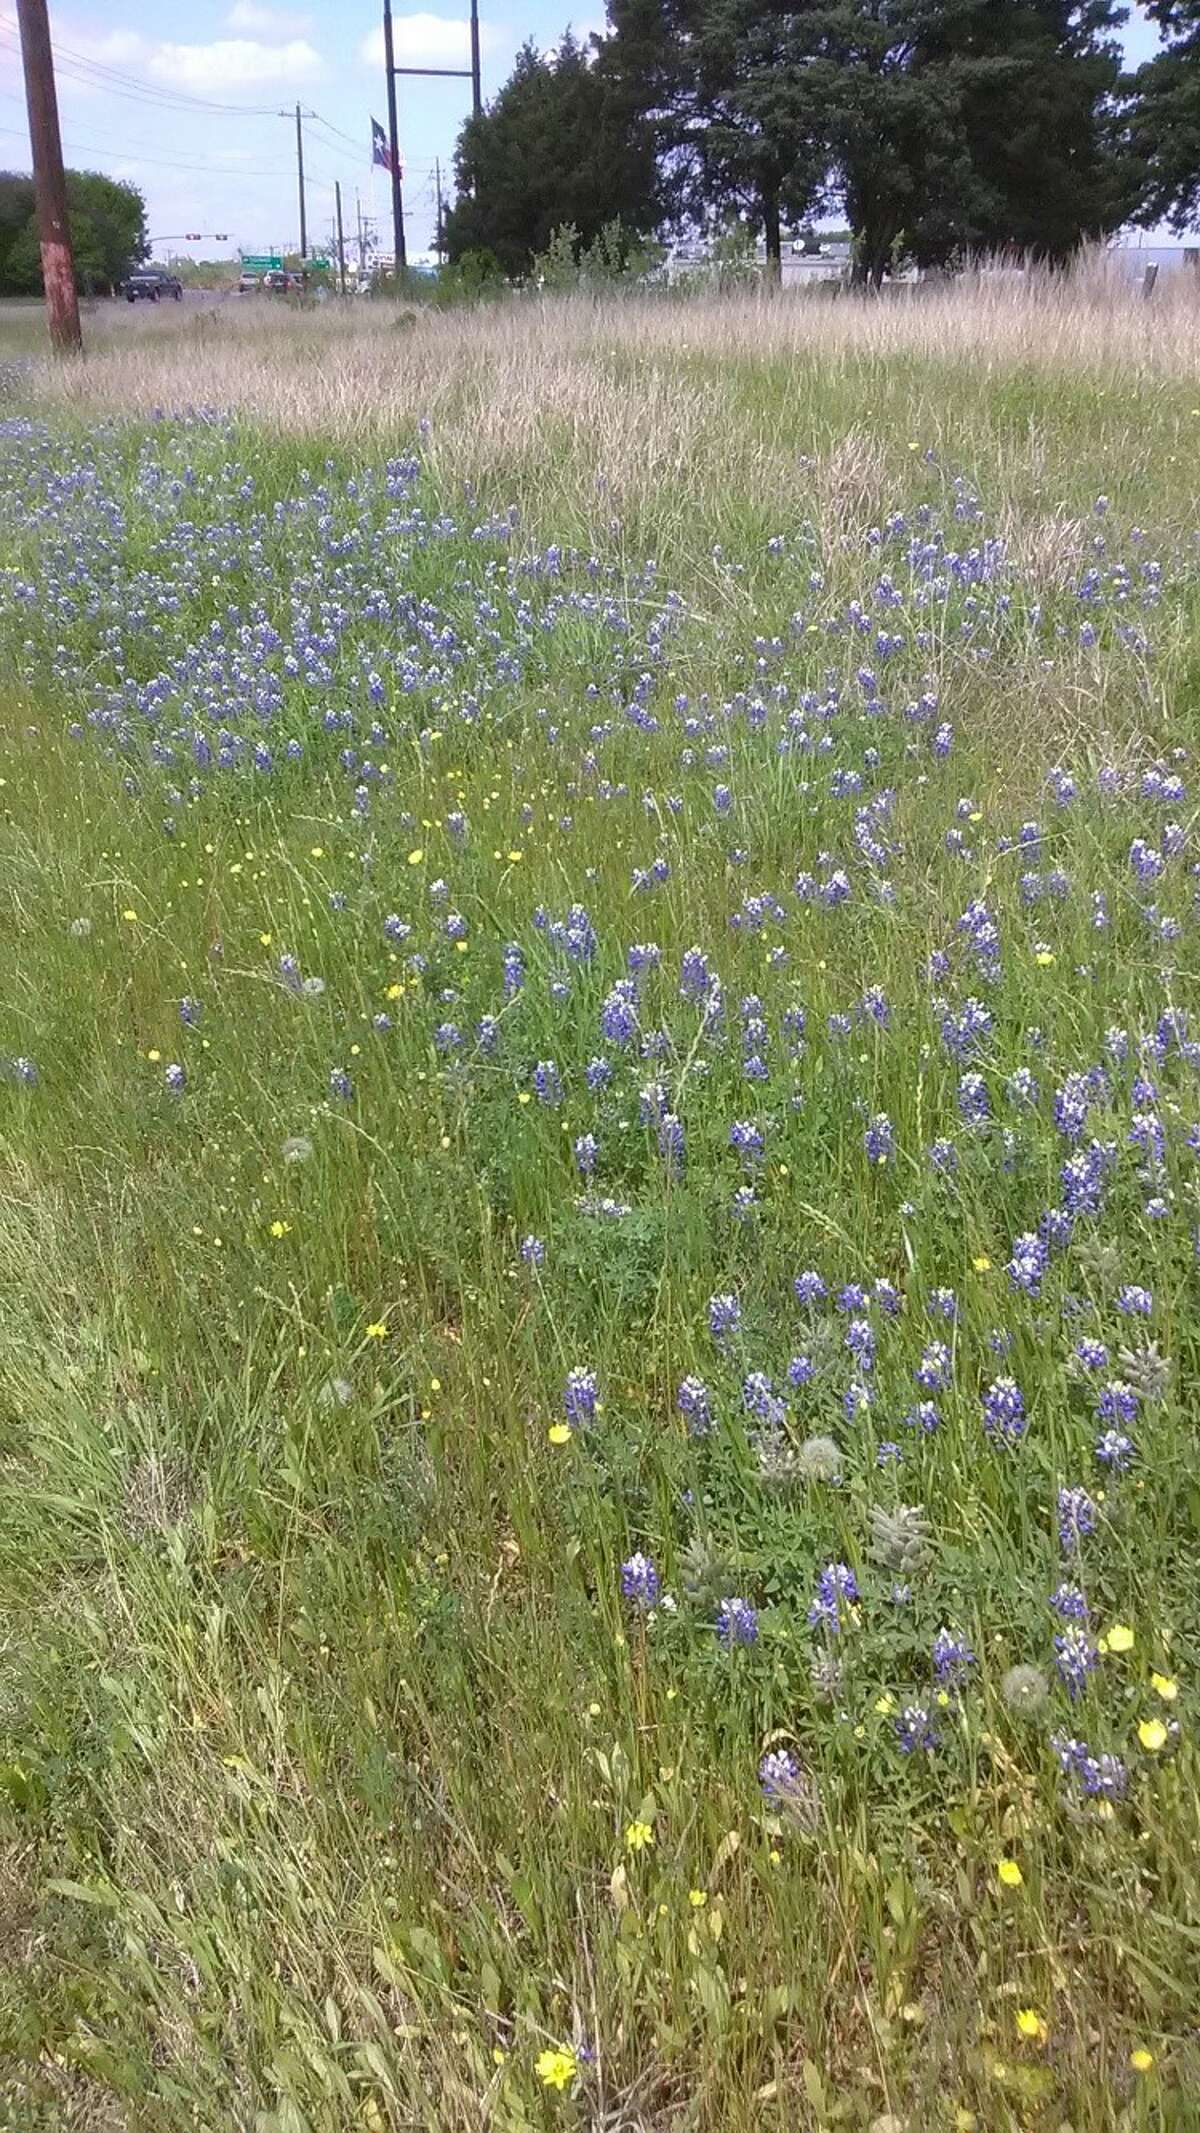 Bluebonnets were named the state flower by the Texas Legislature in 1901.